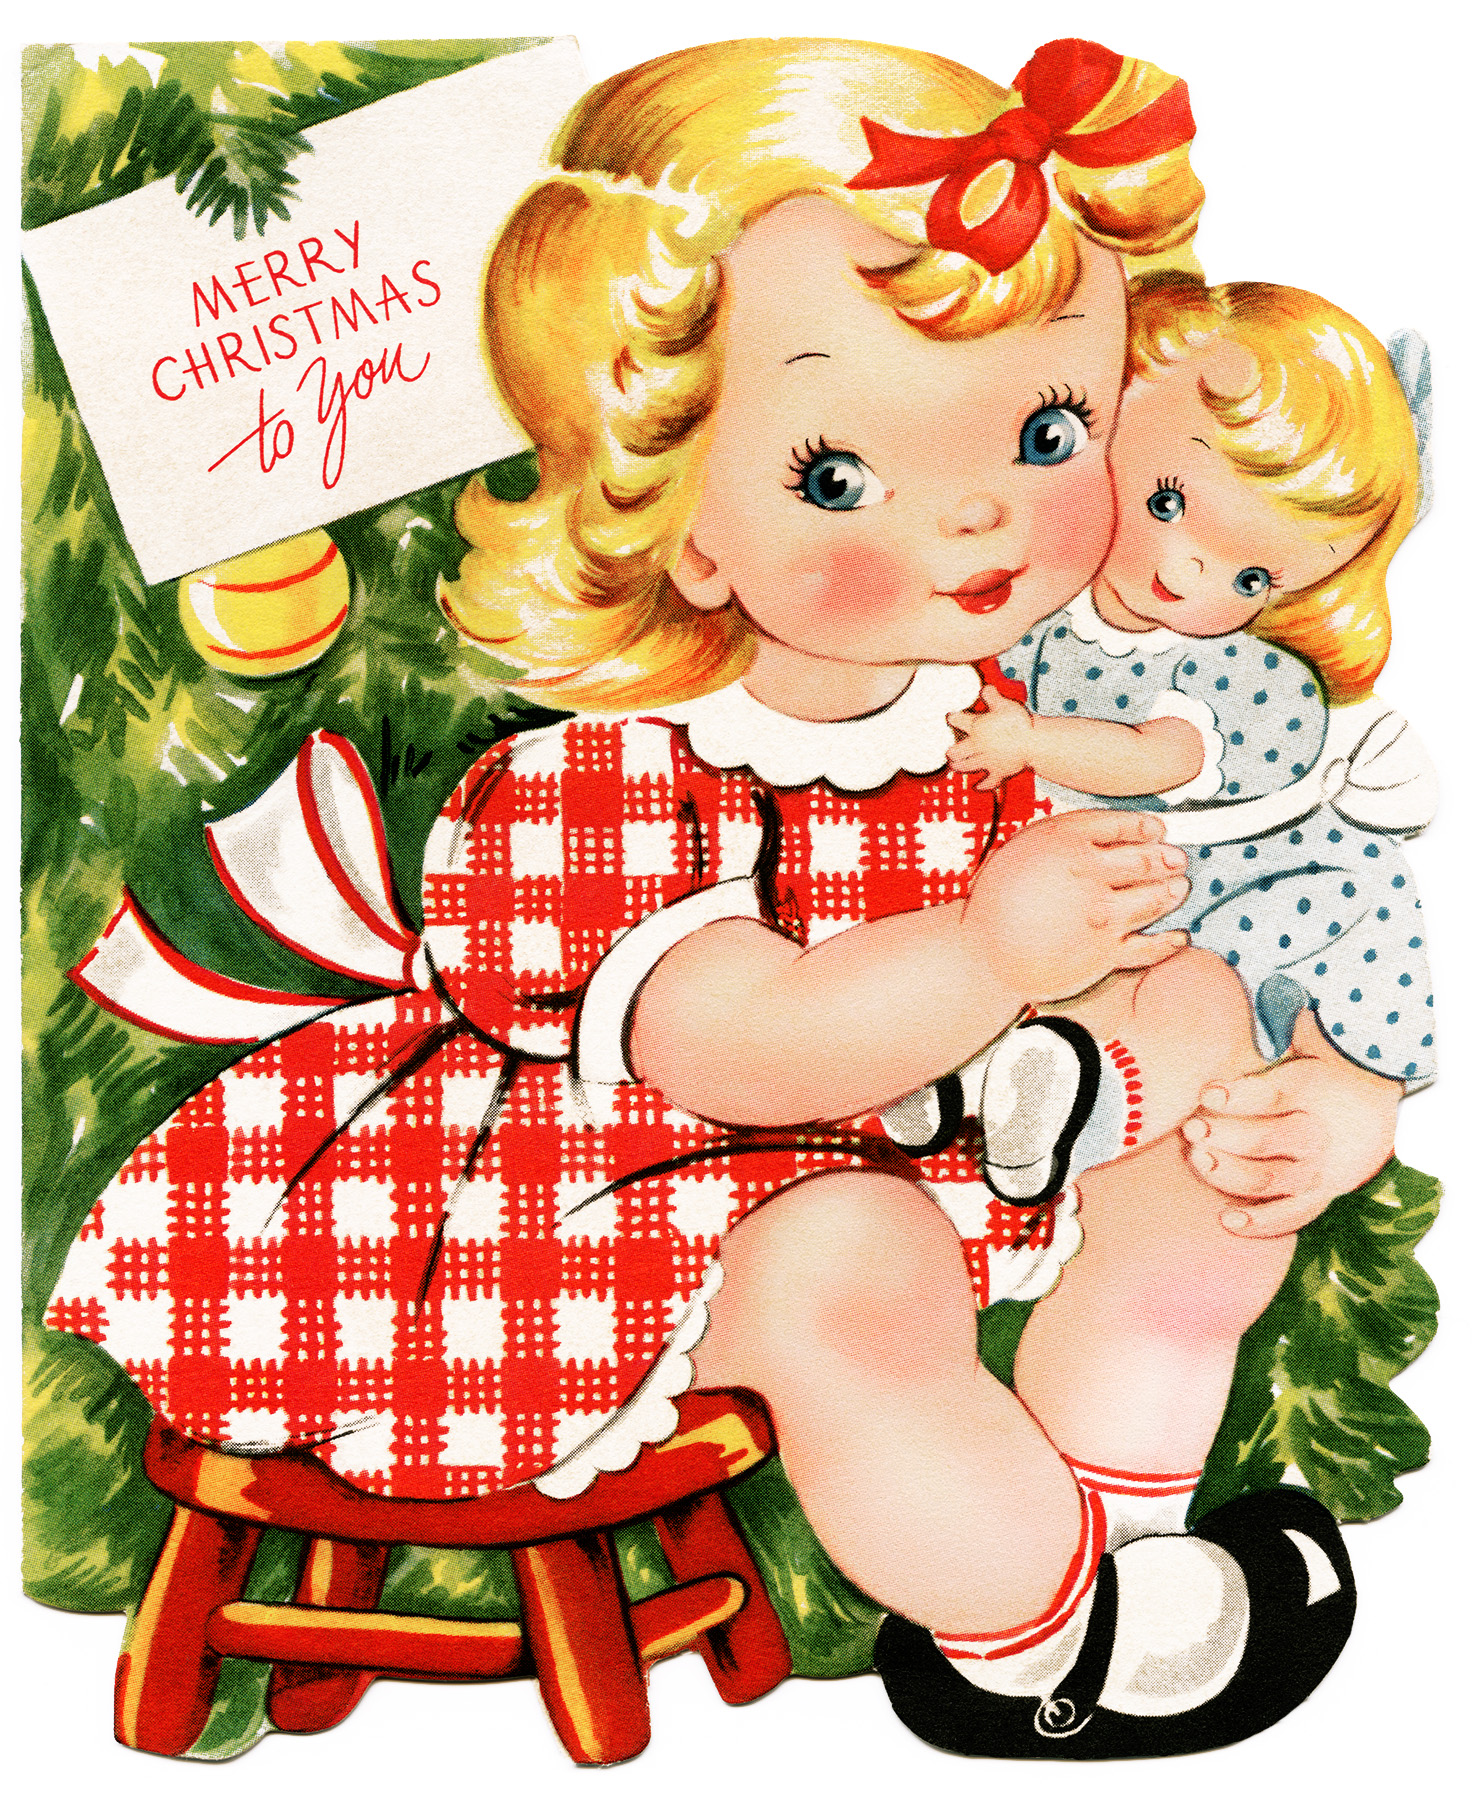 retro christmas card, girl and doll clipart, vintage printable Christmas, old fashioned holiday greeting, 1950 card graphic